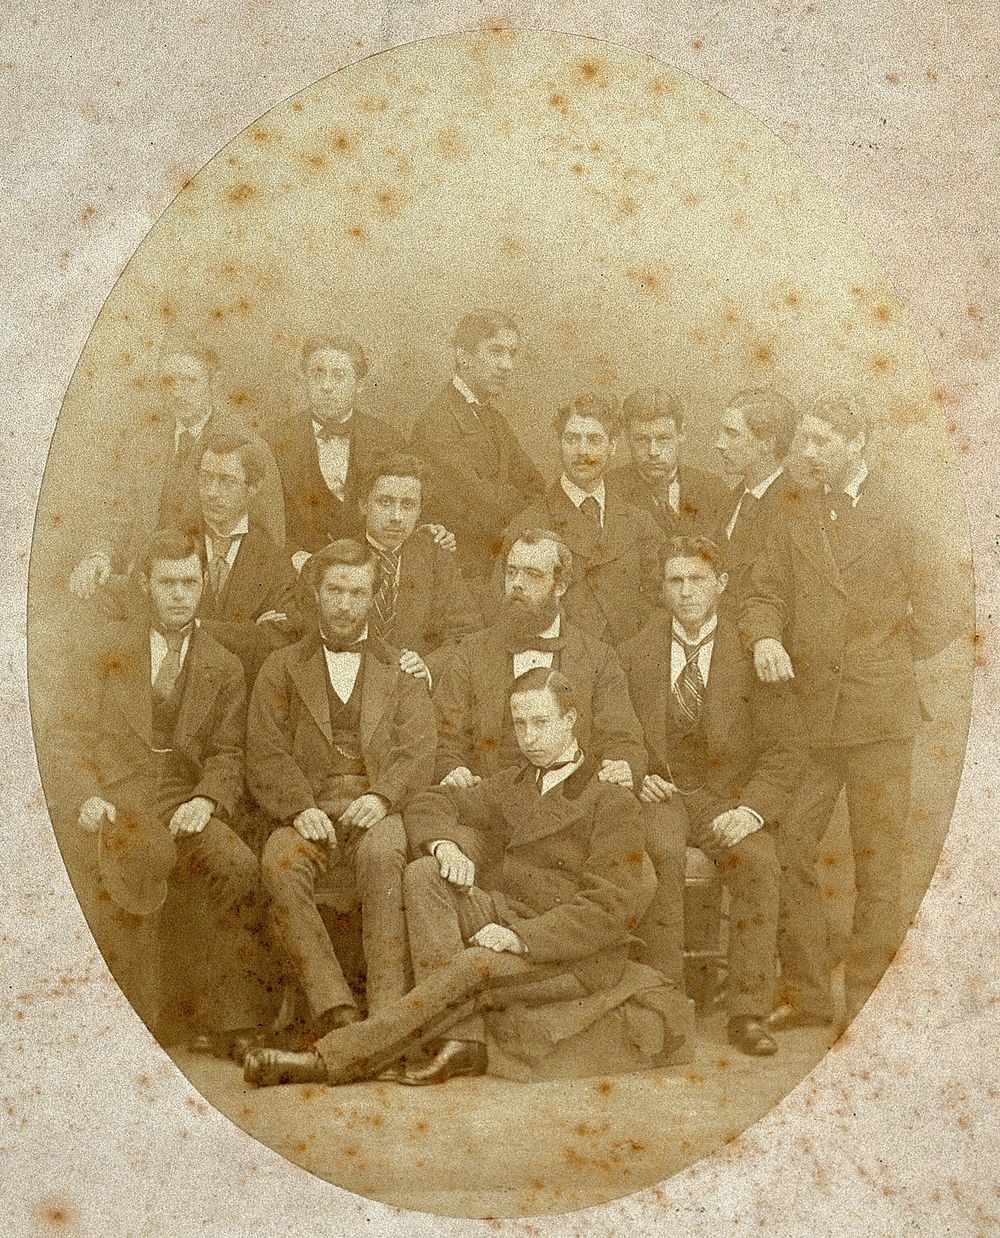 John  Bishop (seated centre with beard ), a surgeon, with his staff (of Edinburgh Royal Infirmary ). Photograph, 1870.